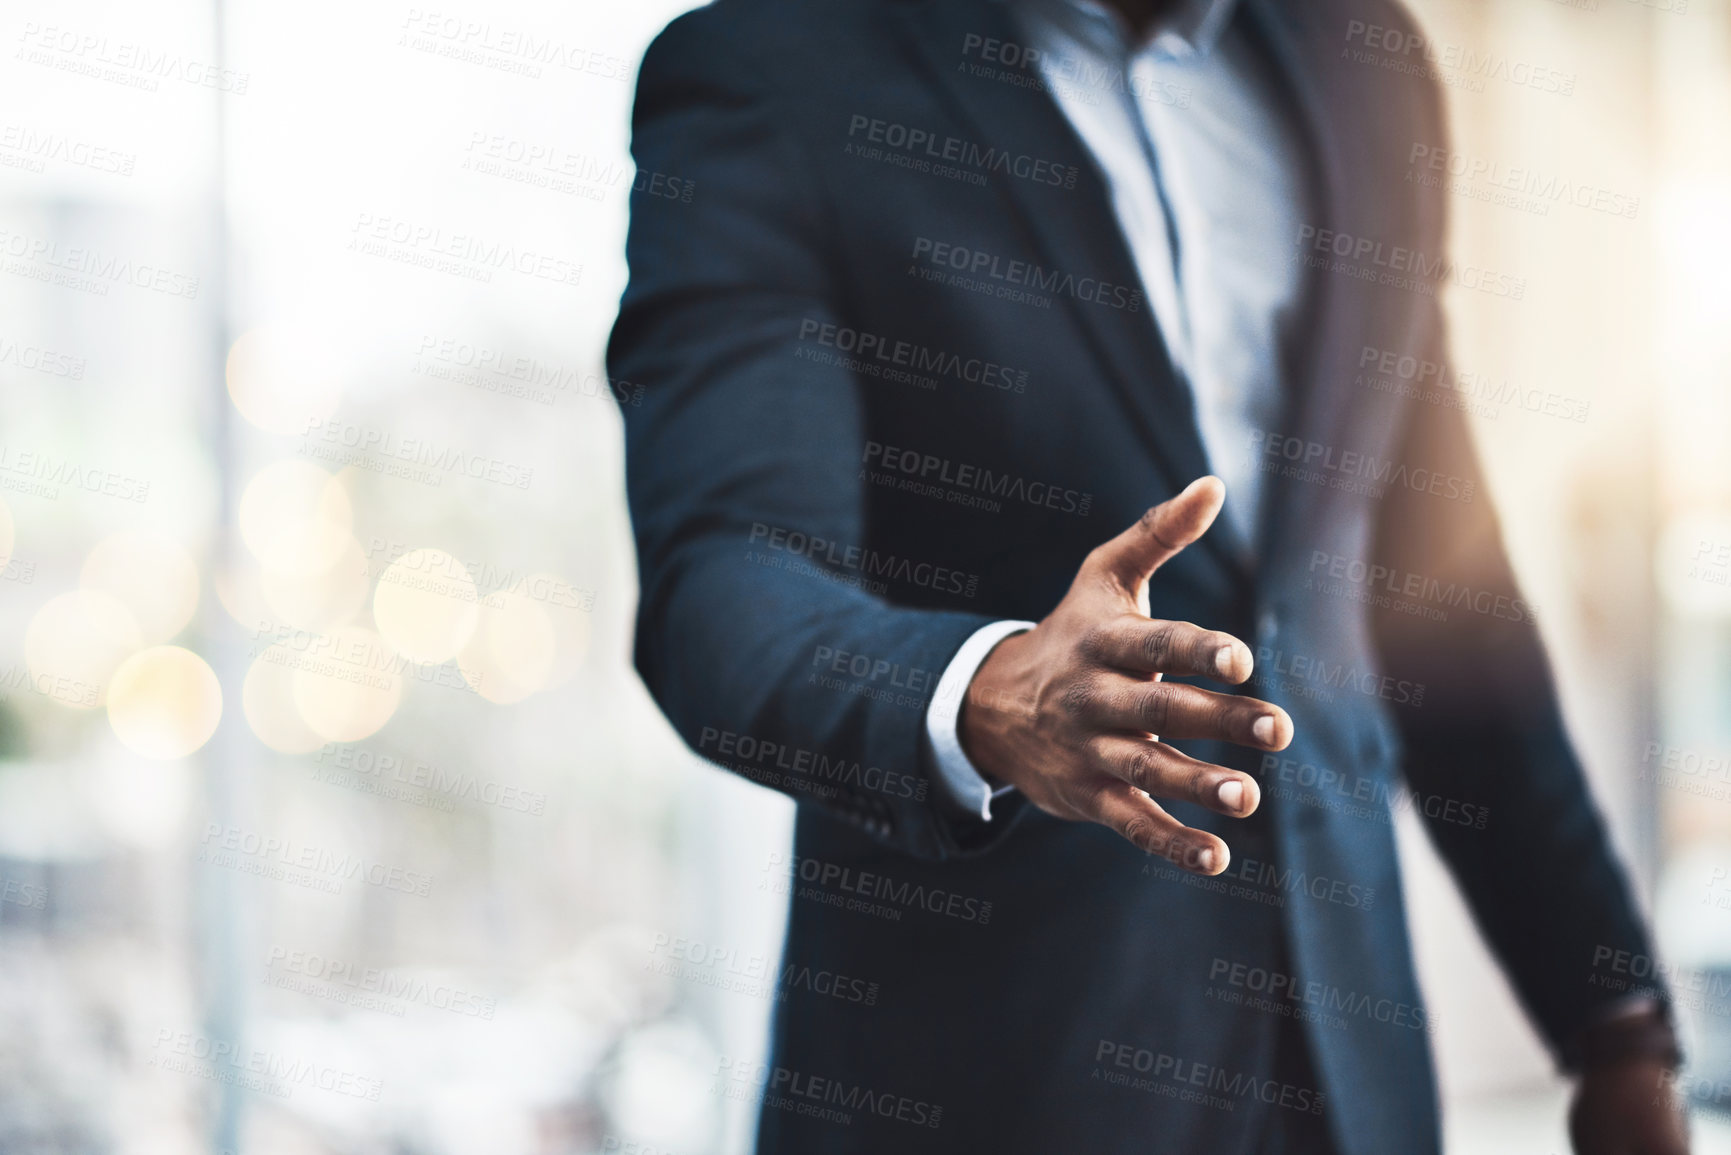 Buy stock photo Cropped shot of an unrecognizable young businessman offering his hand while standing in his modern office